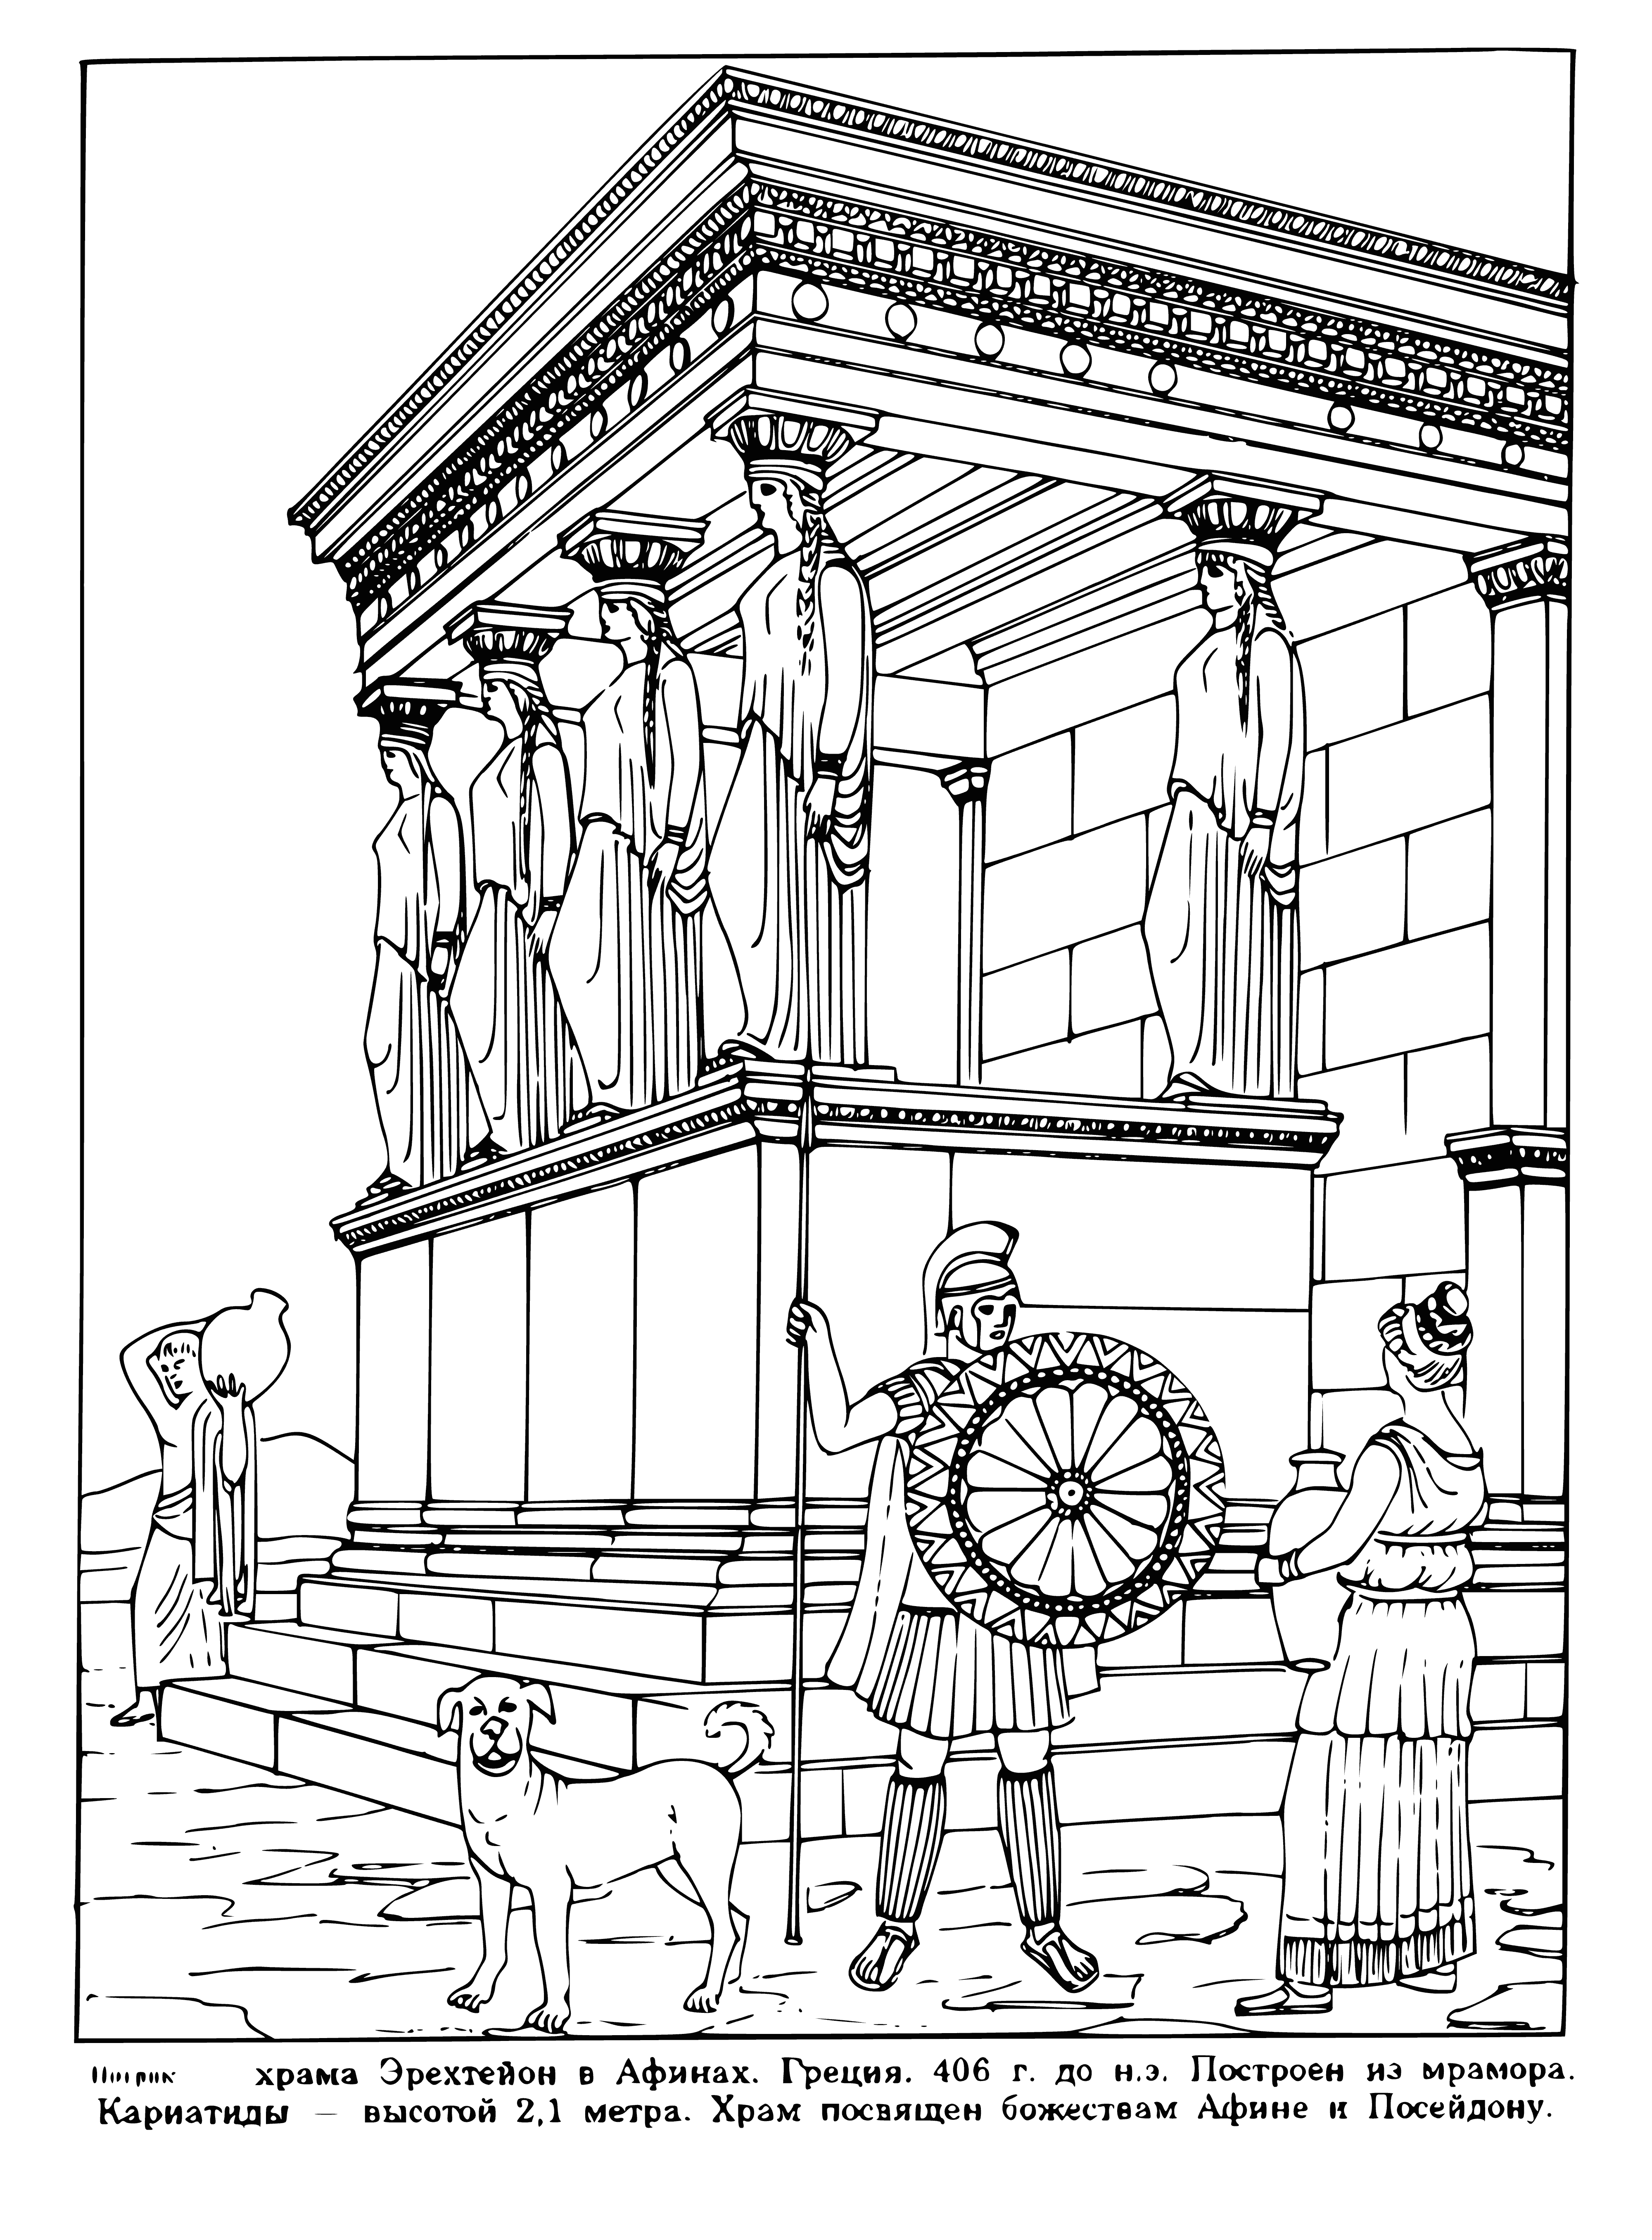 coloring page: Elegant Temple in center of page surrounded by green trees/bushes; majestic columns with steps leading up to it; people milling around grounds. #temple